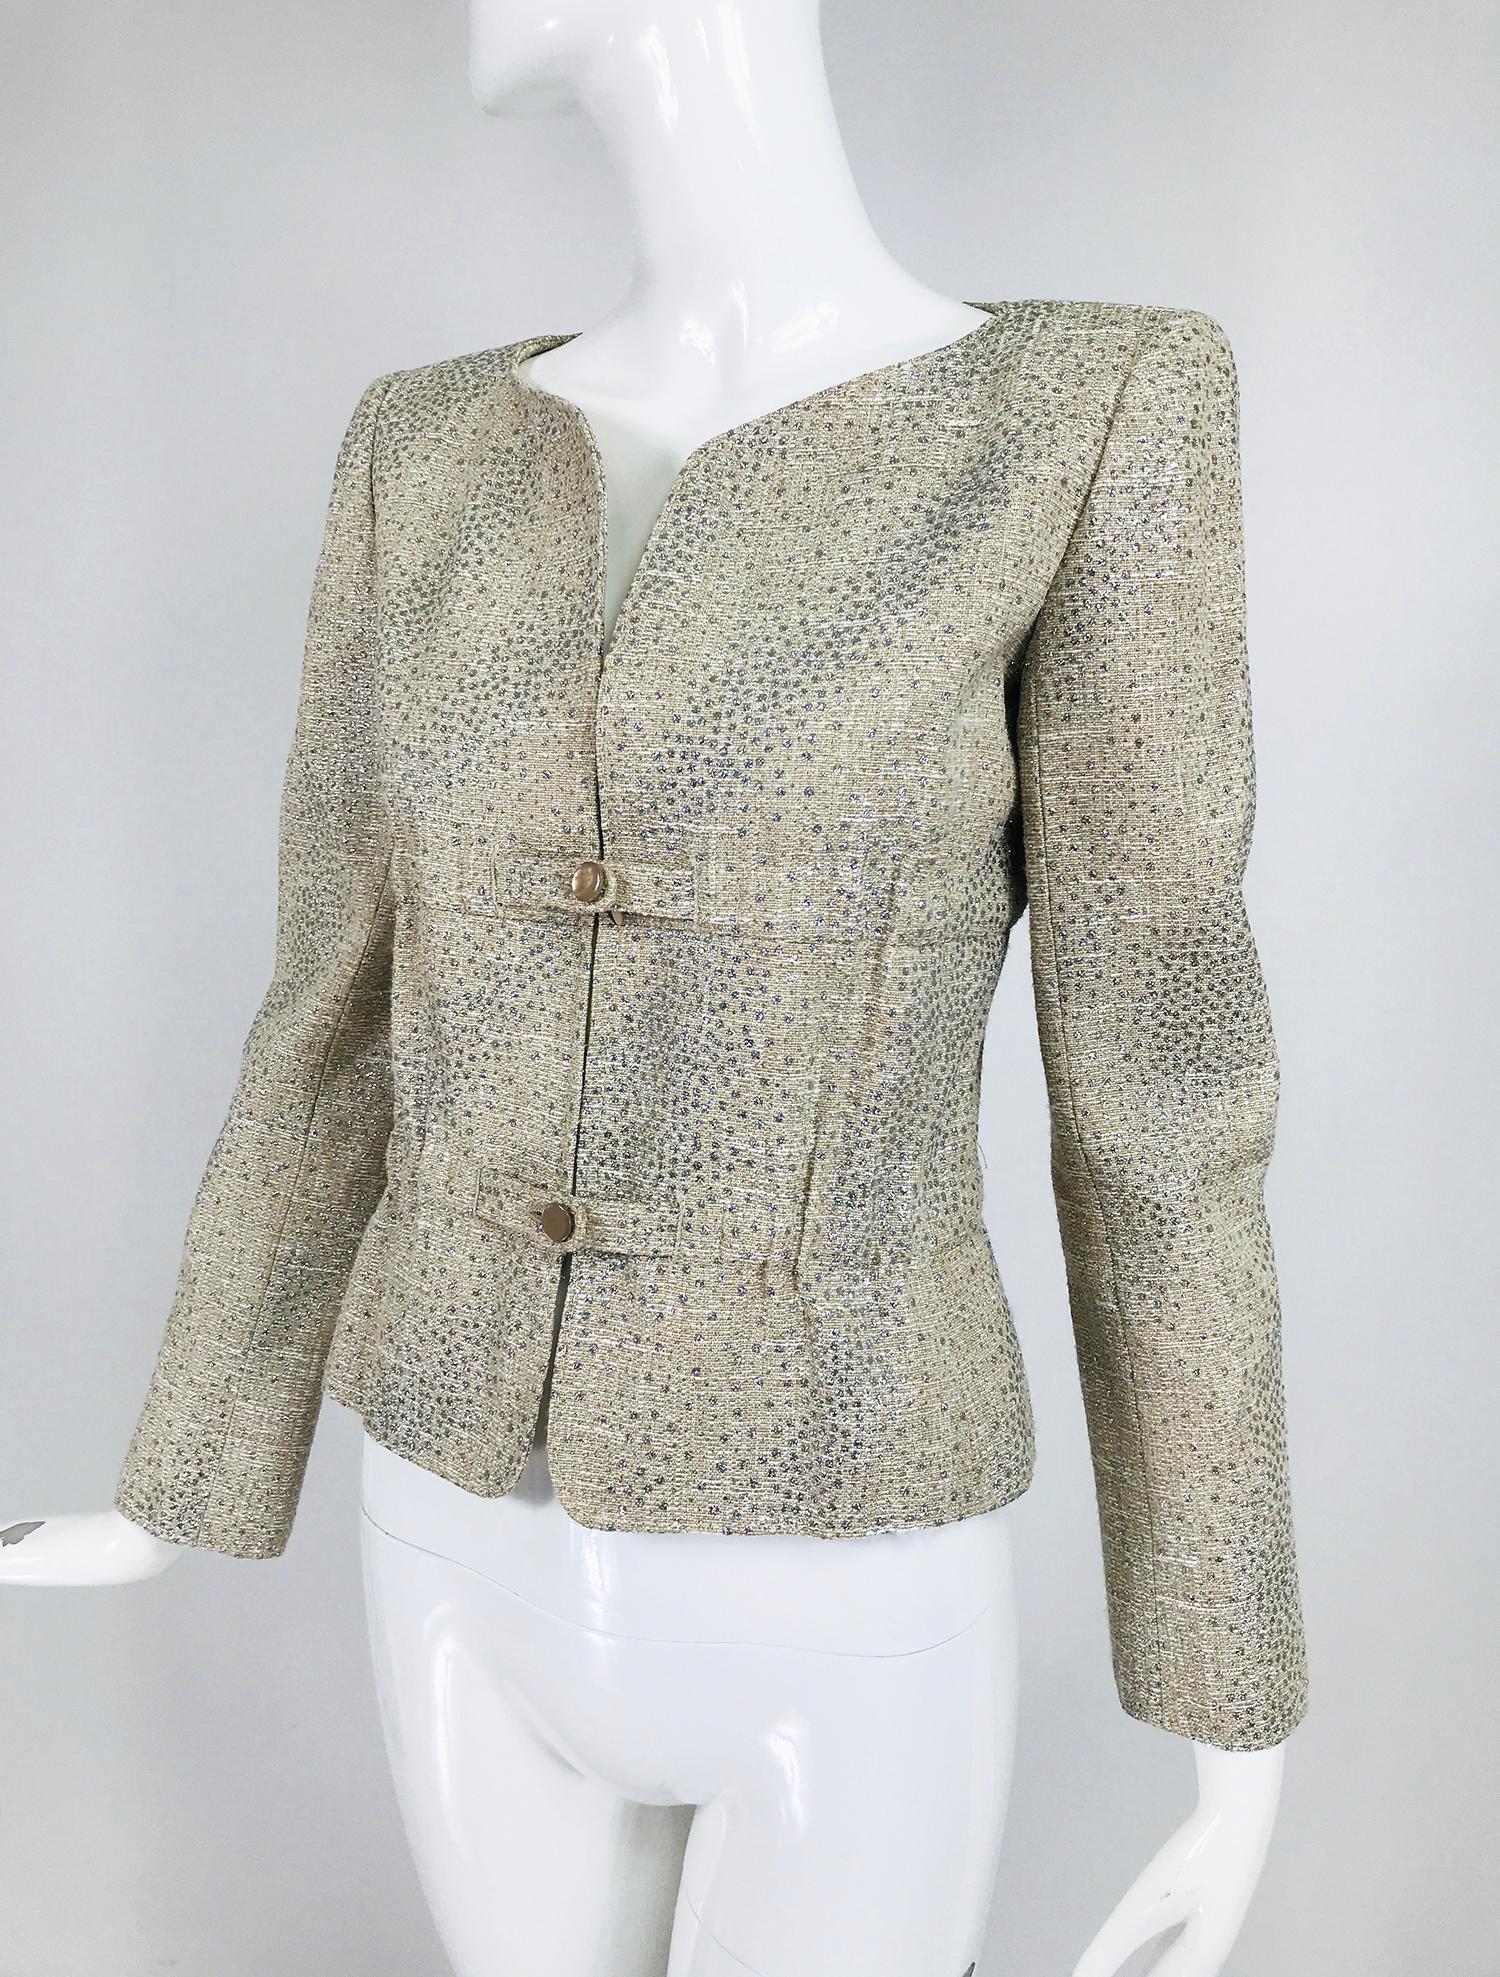 Valentino glitter silver dot metallic gathered waist jacket. This beautiful jacket is silver grey or silver taupe, depending on the light, slub woven fabric sprinkled with tiny and small glittery silver dots. Princess seamed, open neckline with